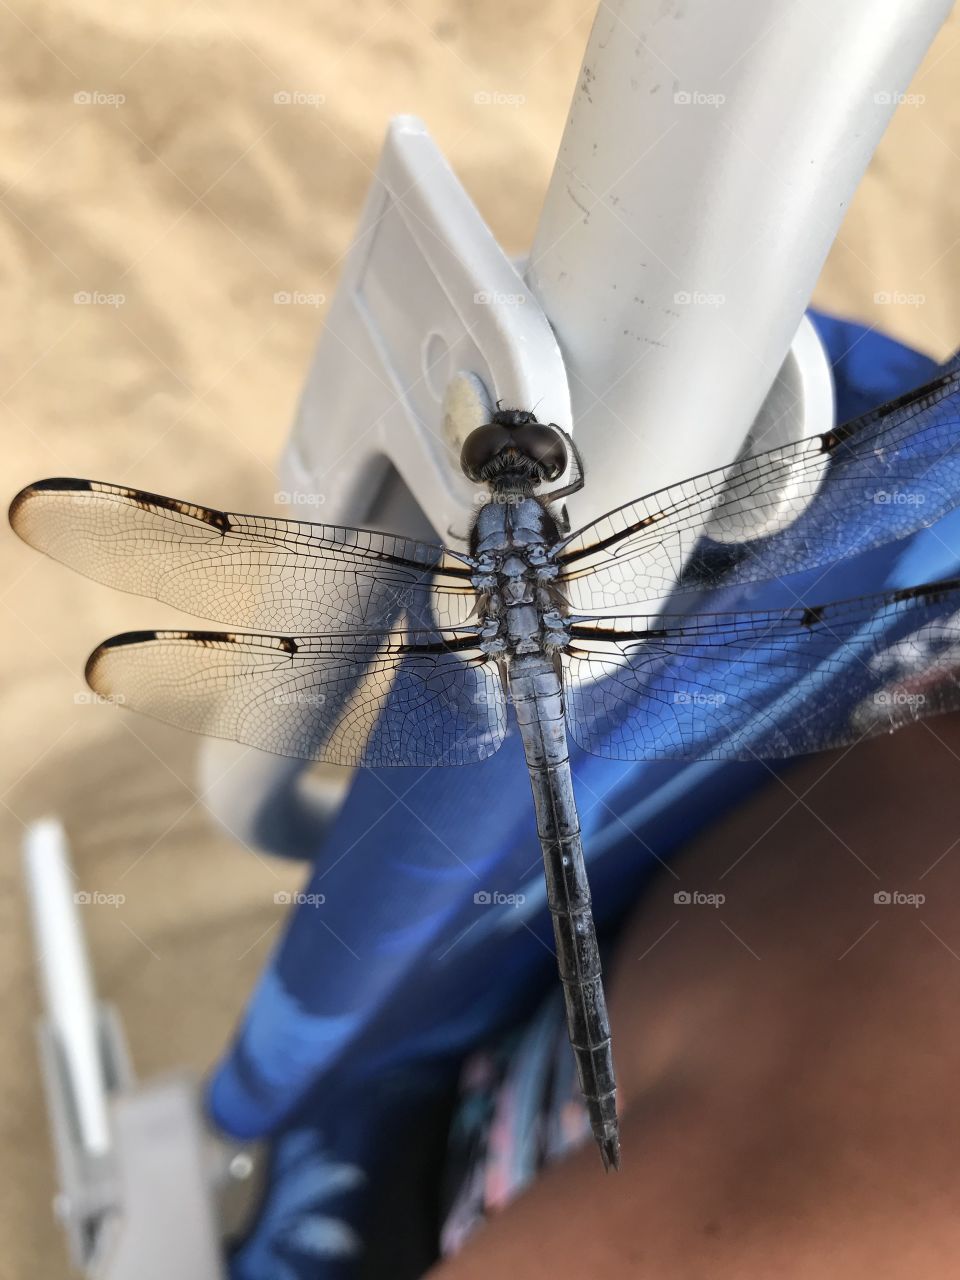 Dazzling Dragonfly at the beach 